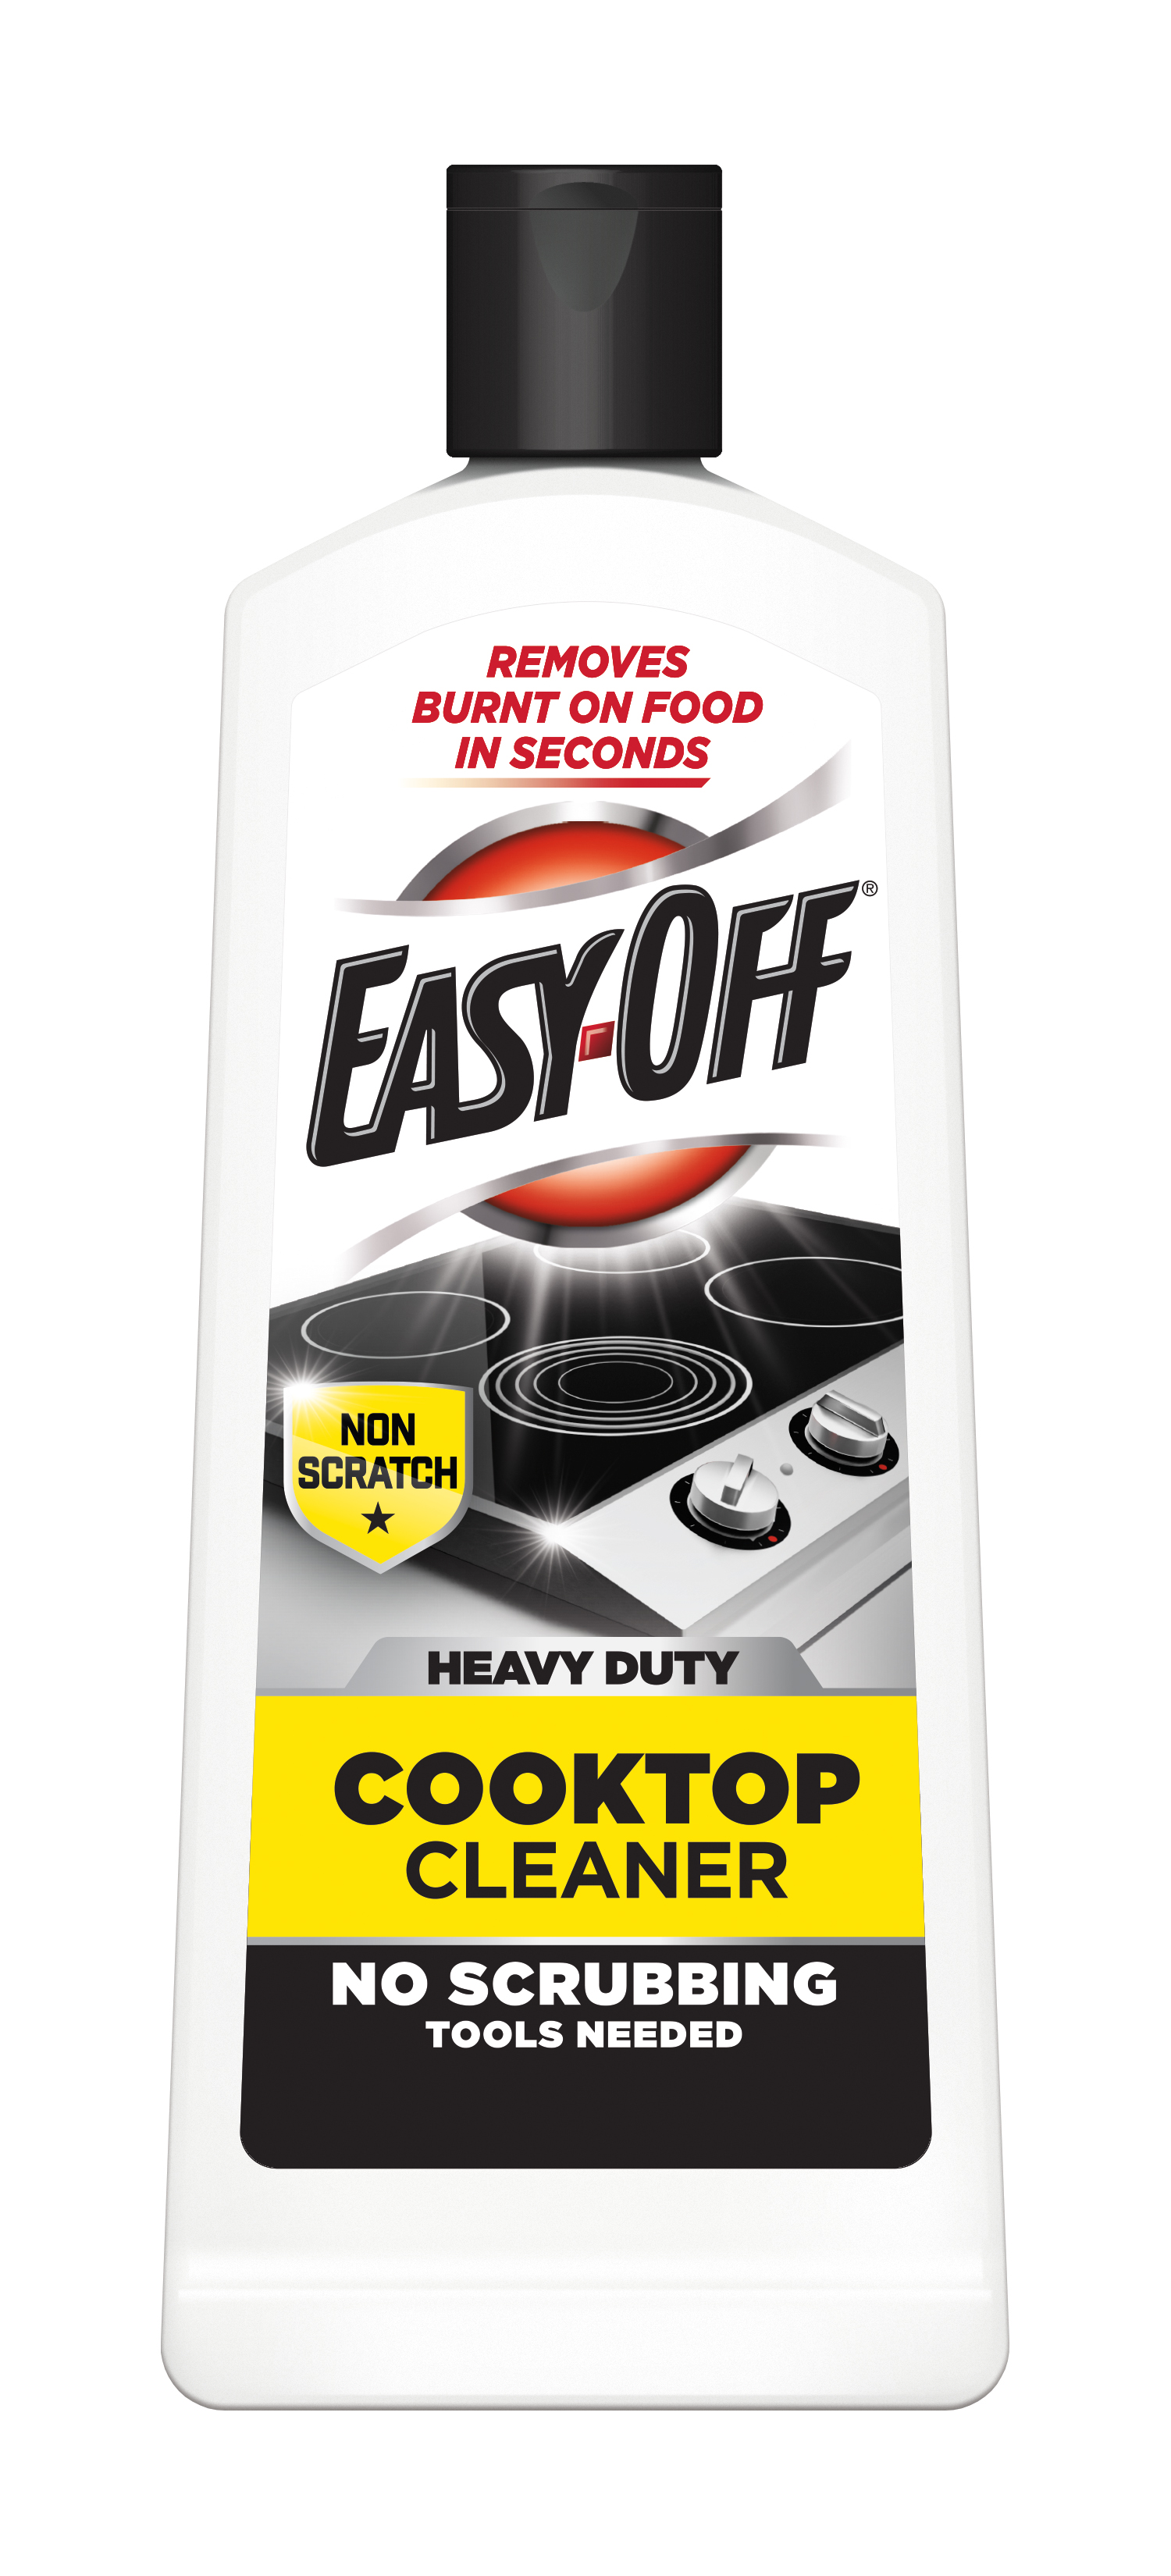 Easy-Off Heavy Duty Cooktop Cleaner